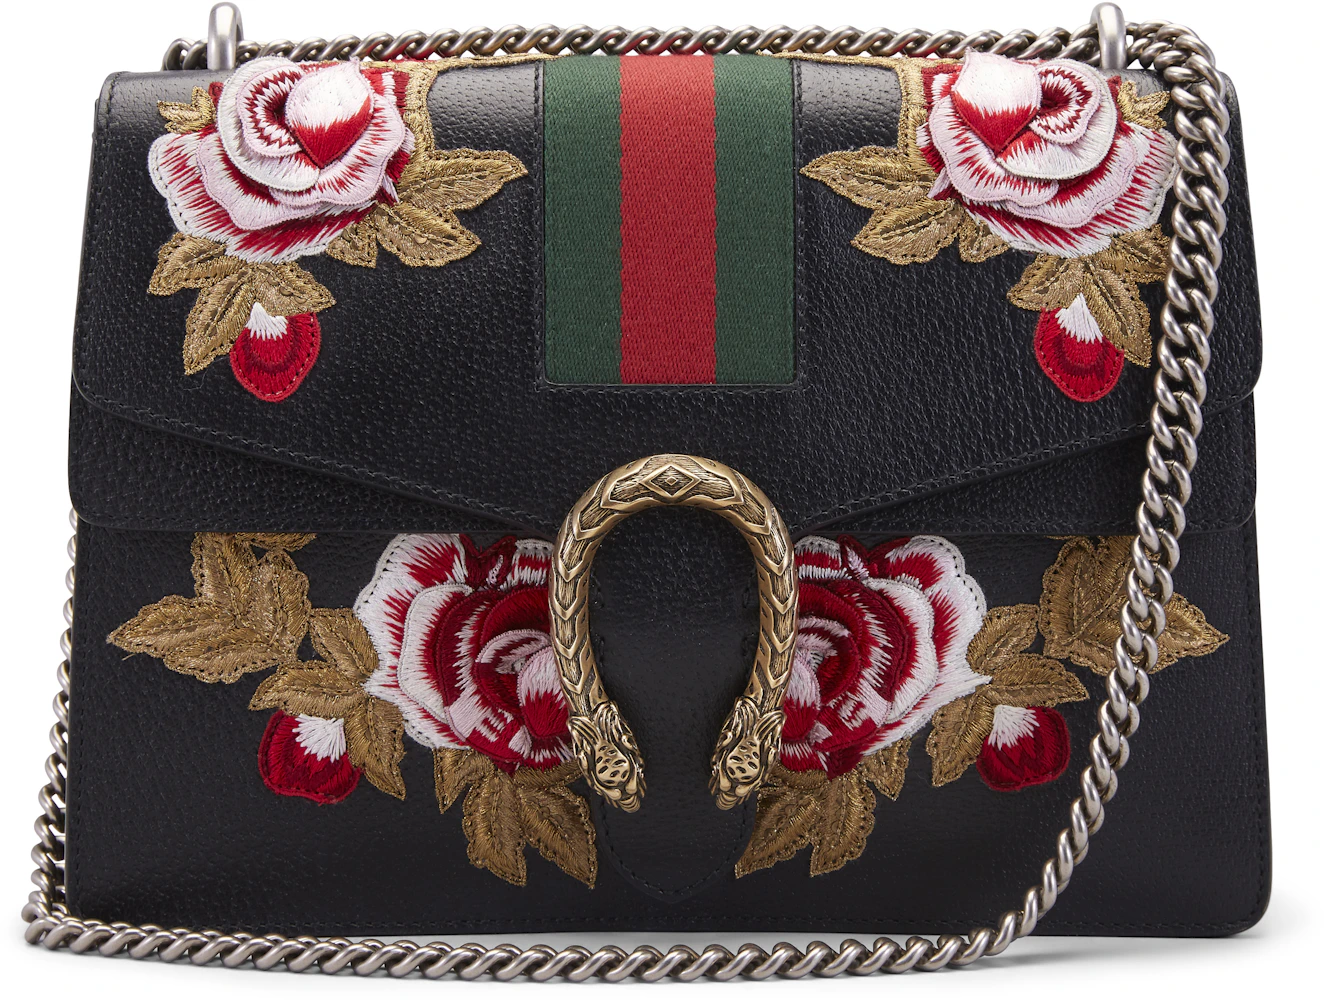 Gucci - Bee-embroidered Dionysus - Brand New